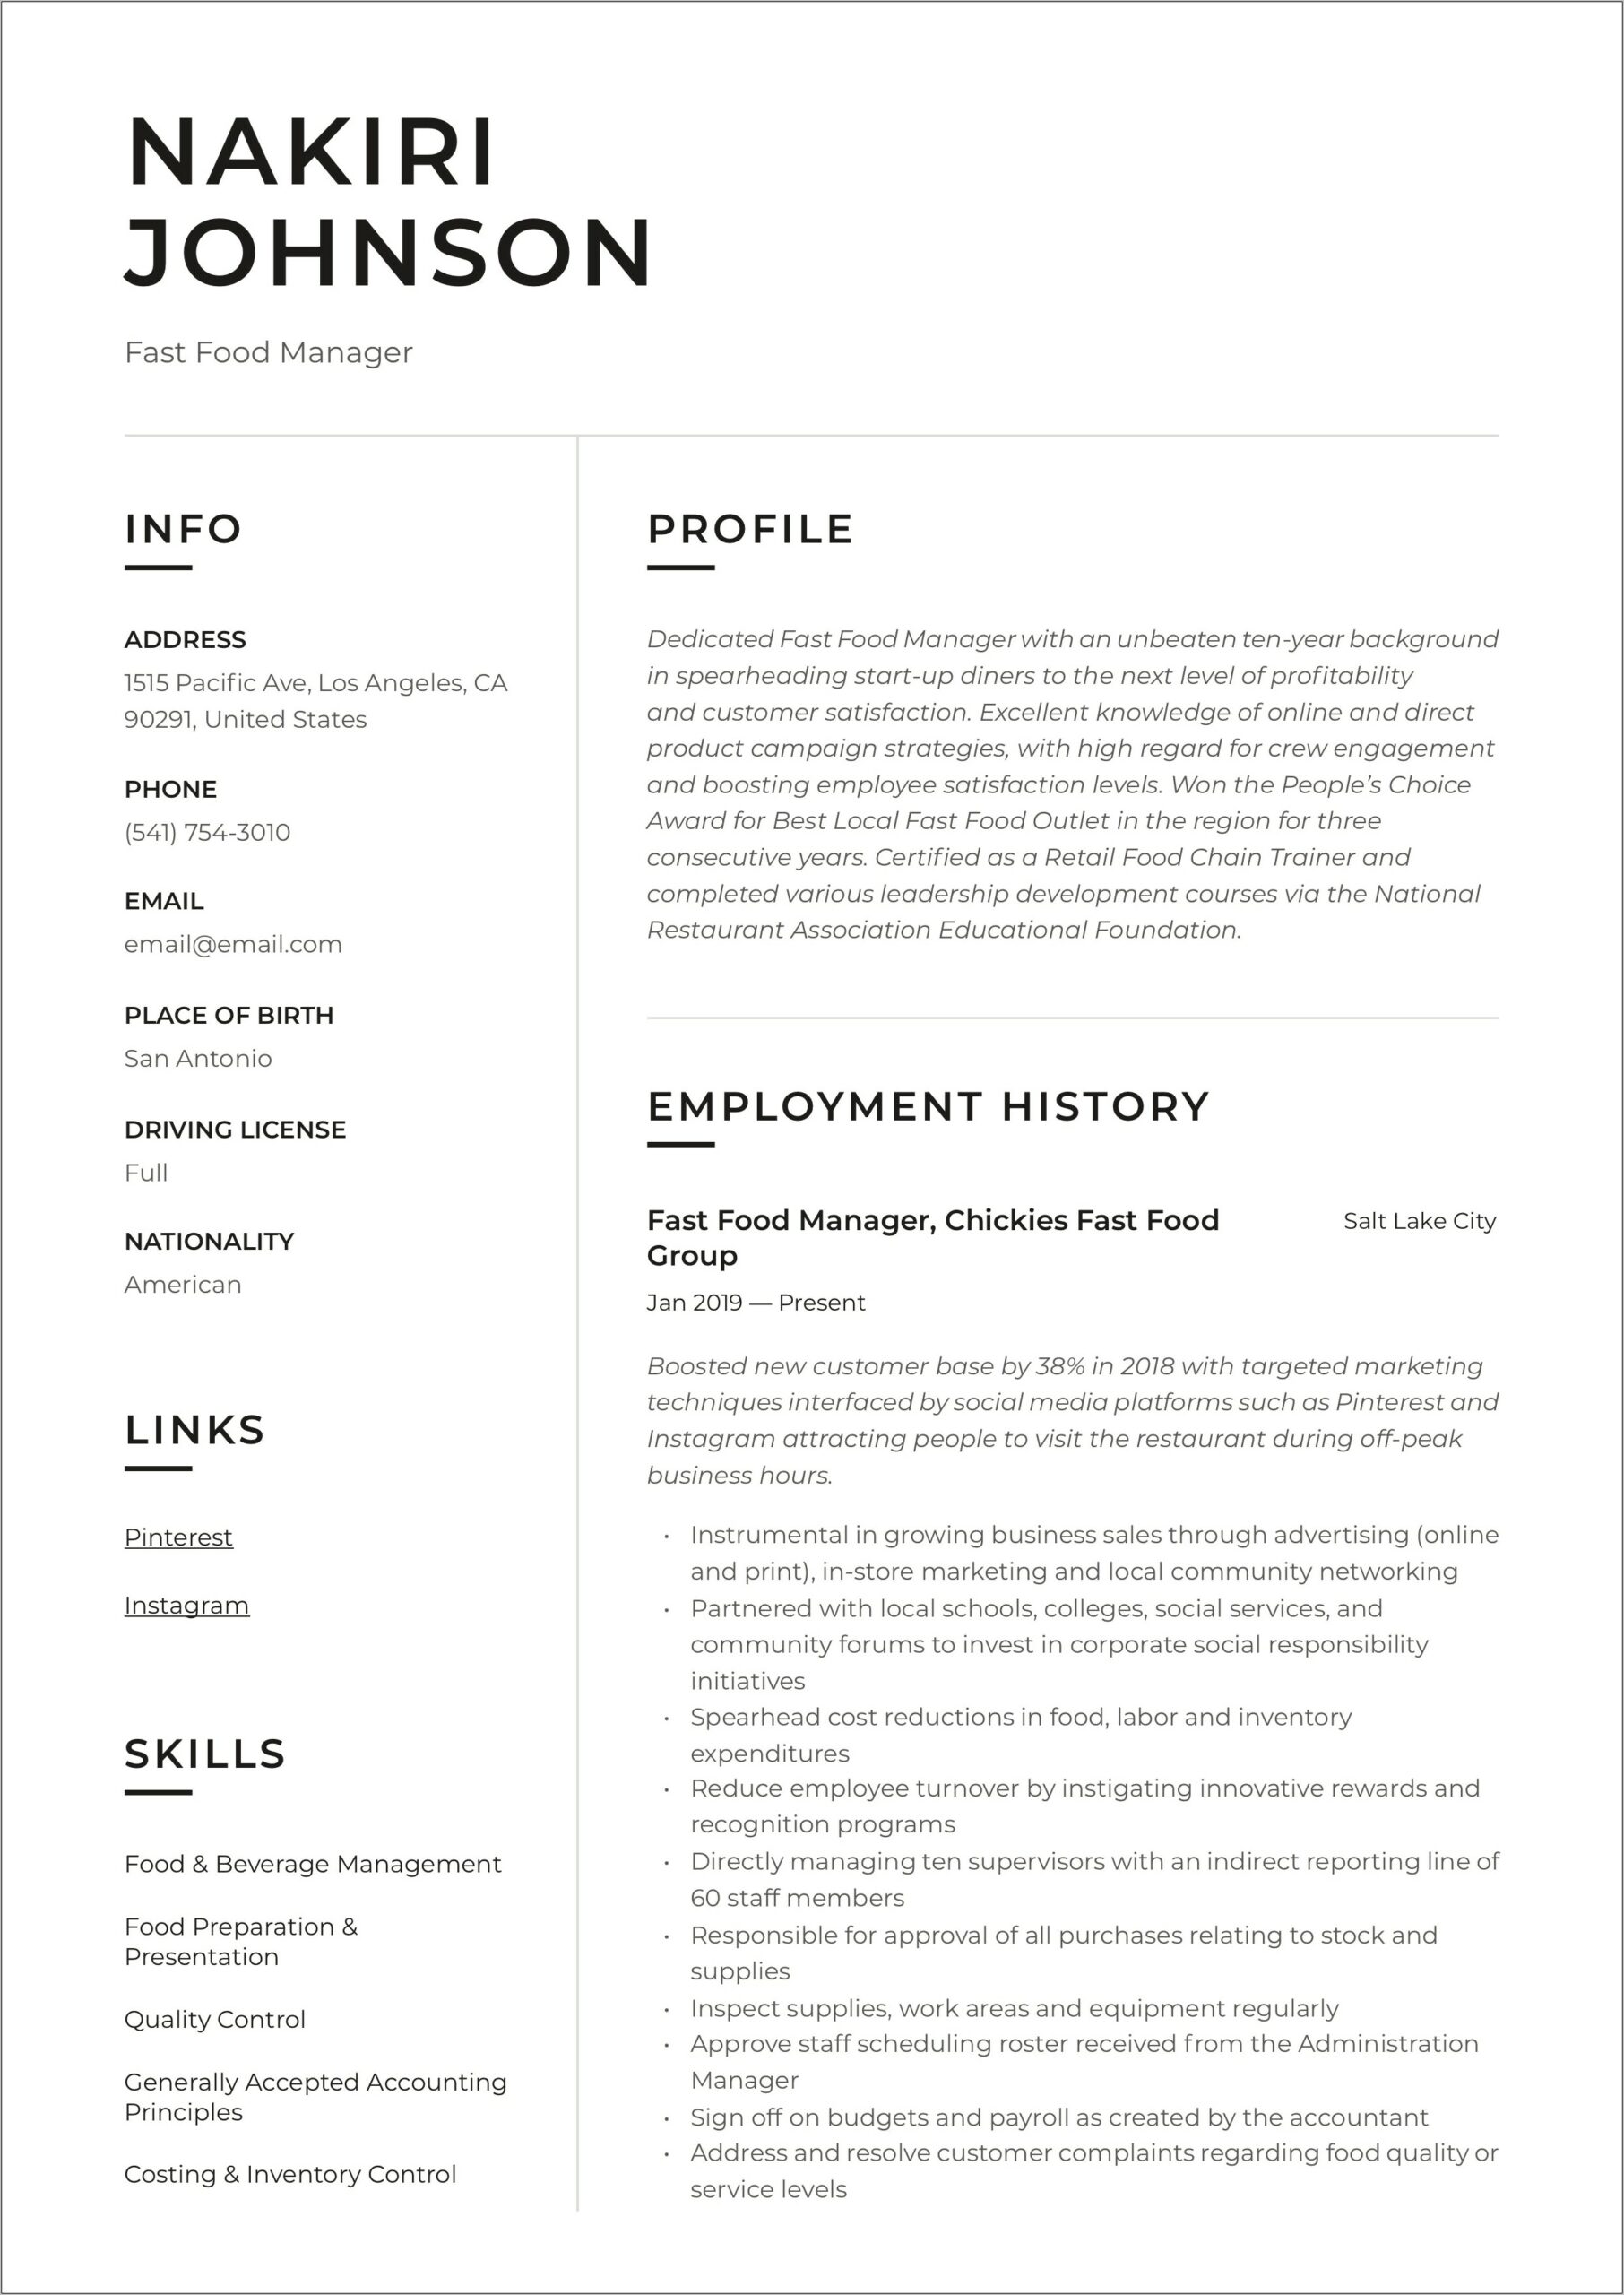 Resume Skills Examples For Fast Food